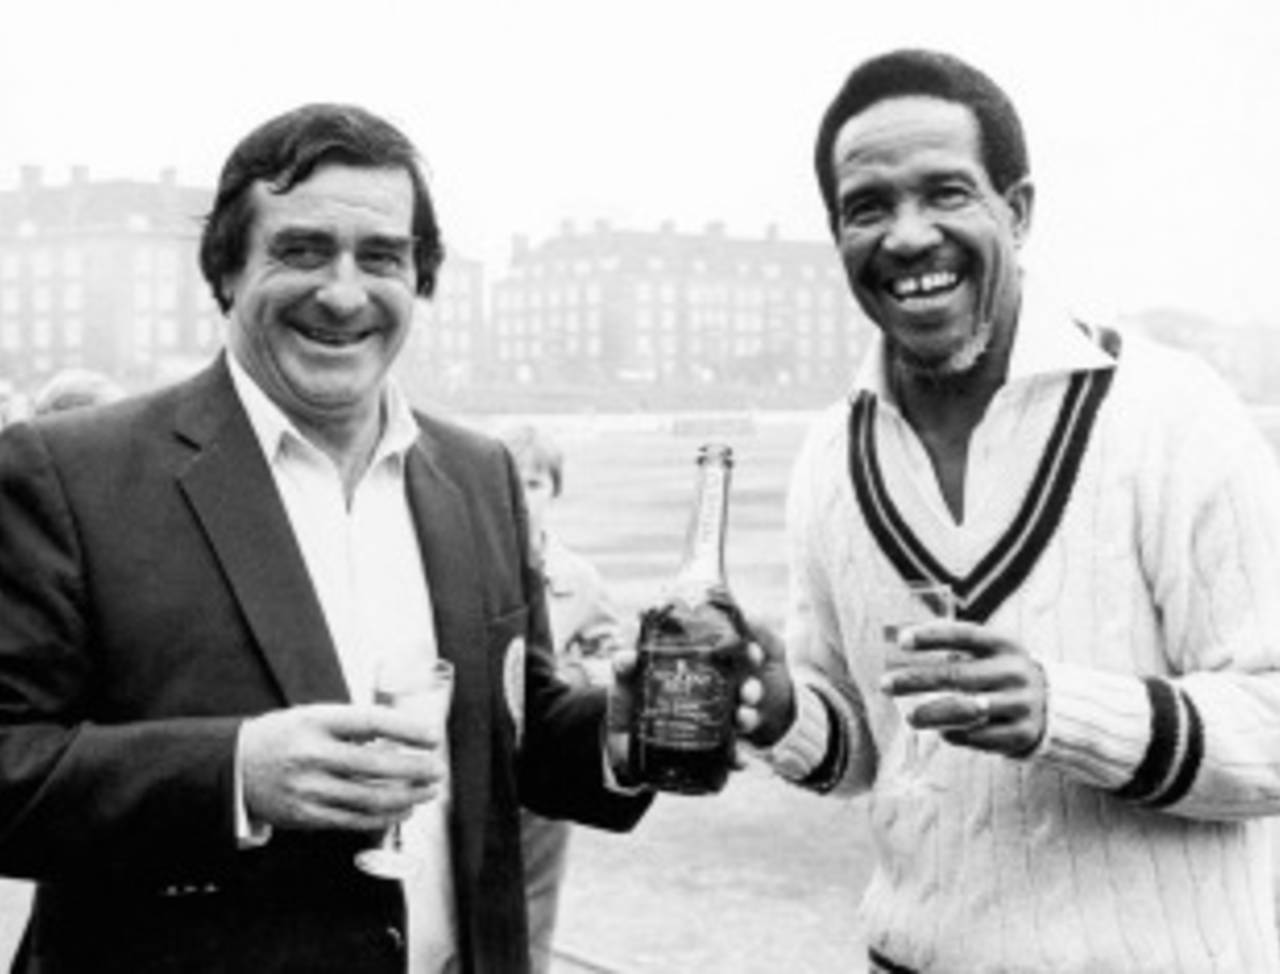 Fred Trueman and Garry Sobers share a drink, The Oval, September 19, 1982